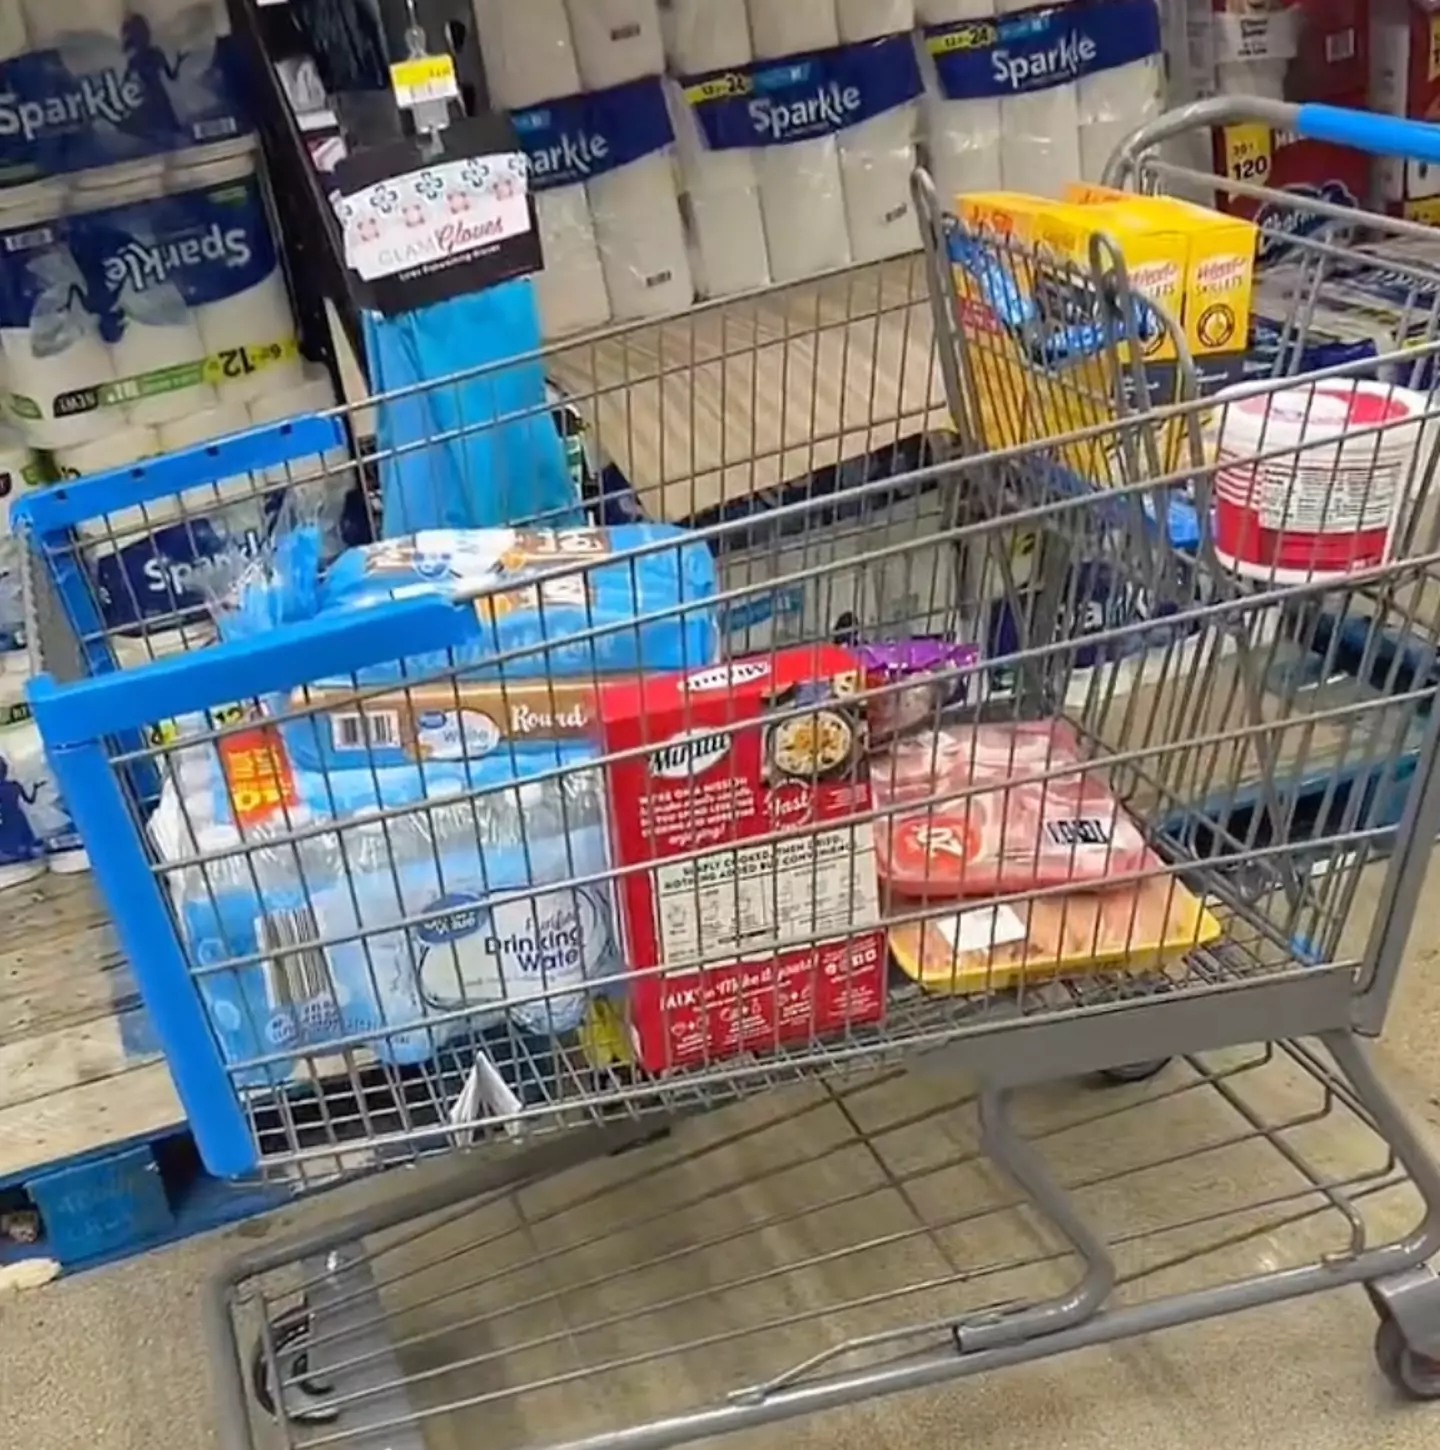 The cart was abandoned with a number of perishable goods in it.